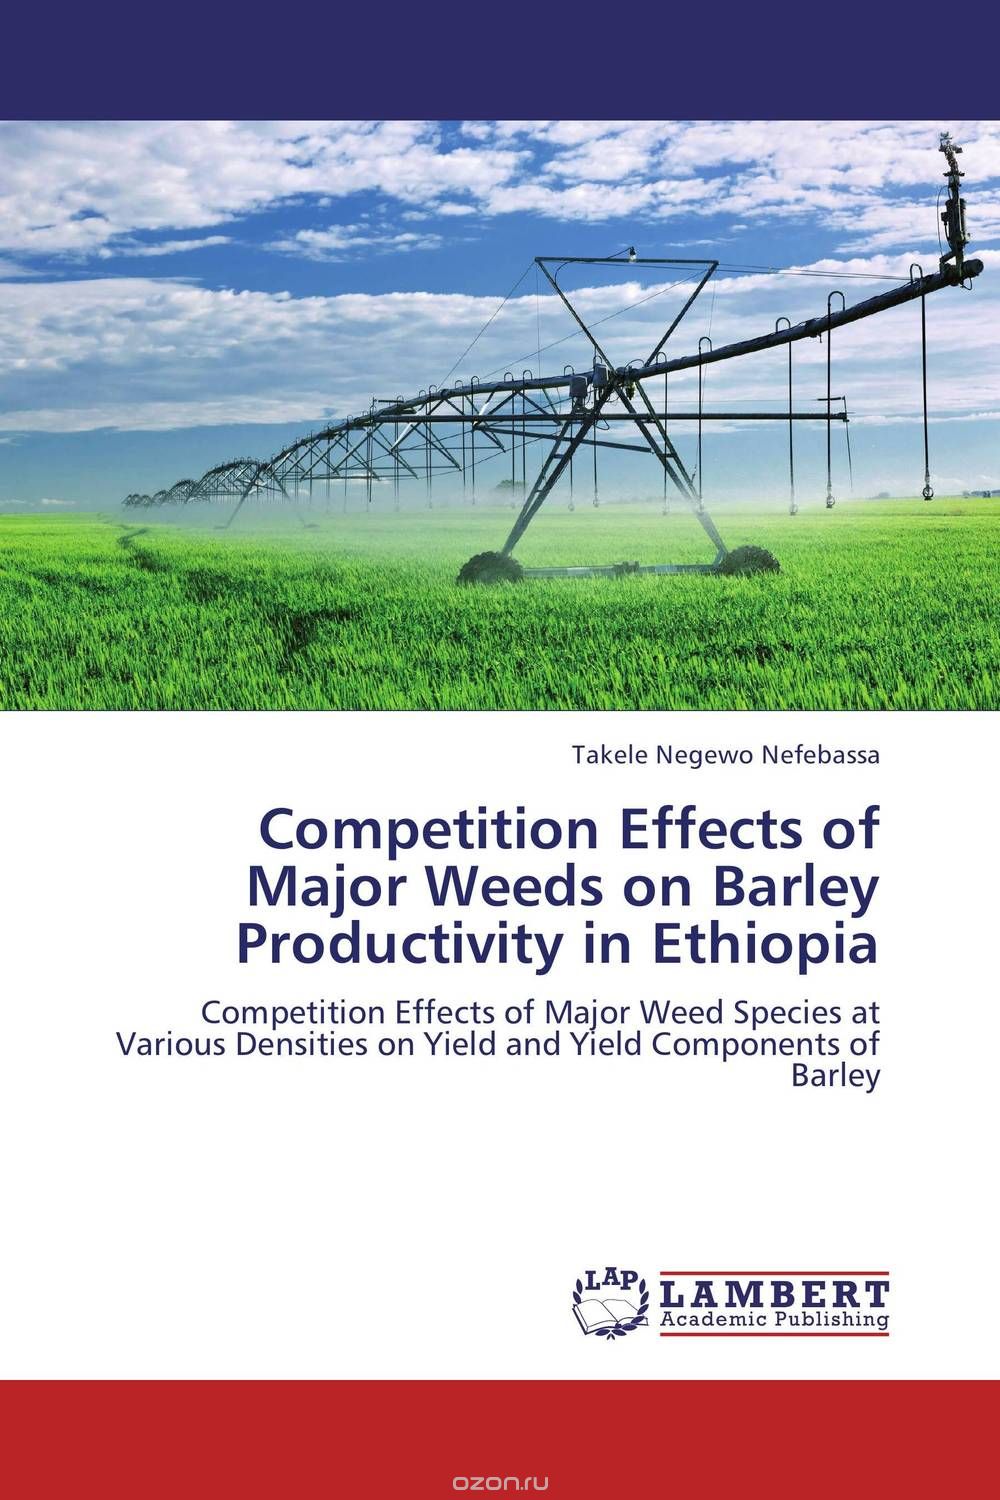 Скачать книгу "Competition Effects of Major Weeds on Barley Productivity in Ethiopia"